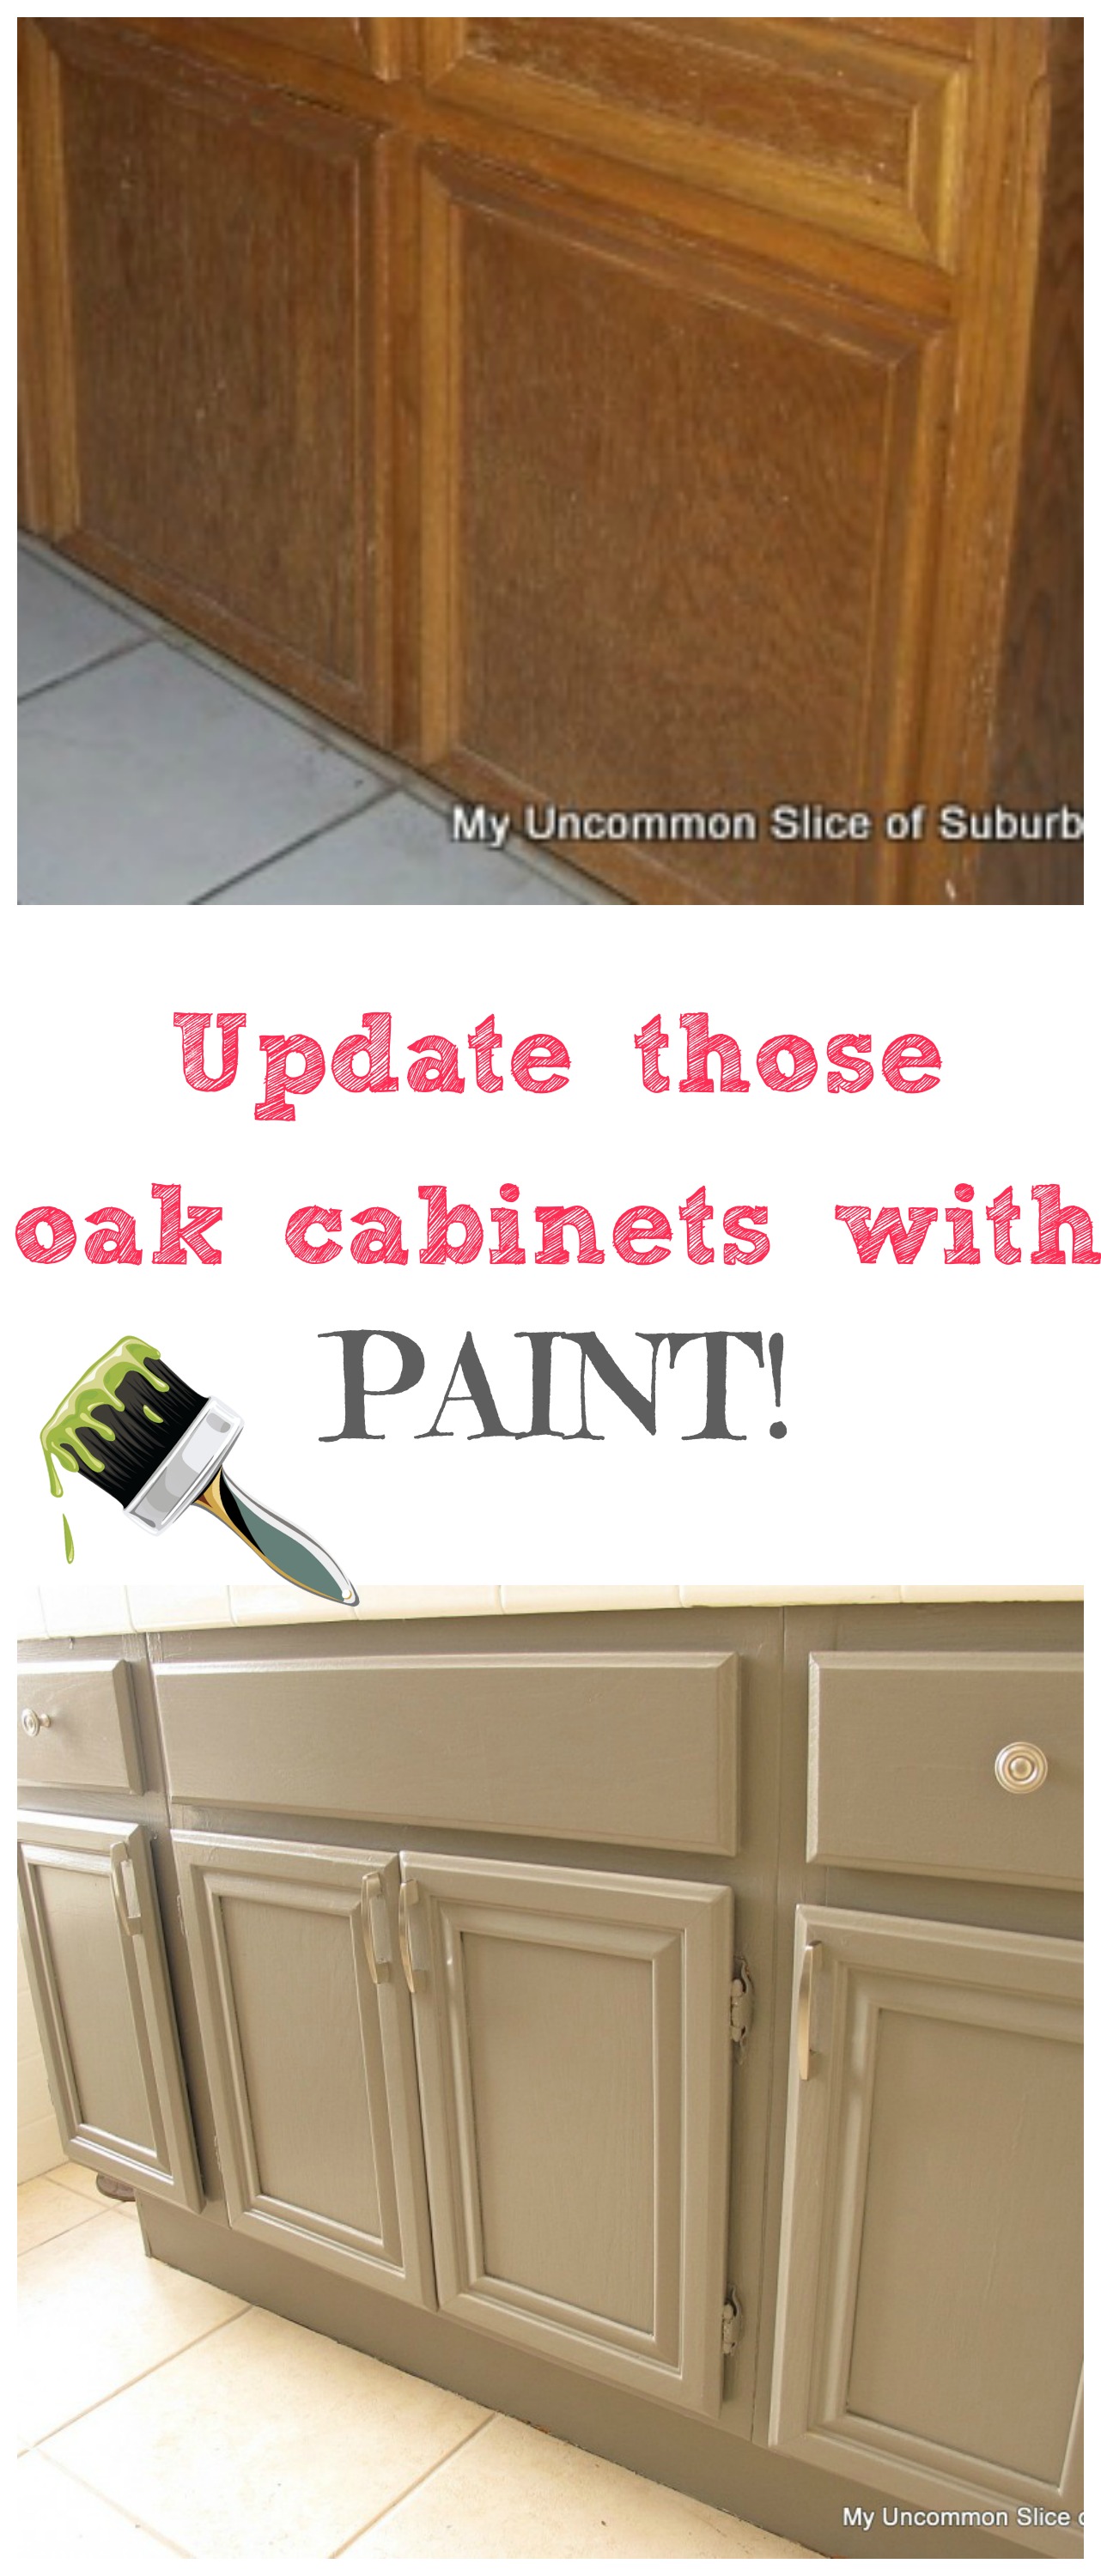 How to paint oak cabinets